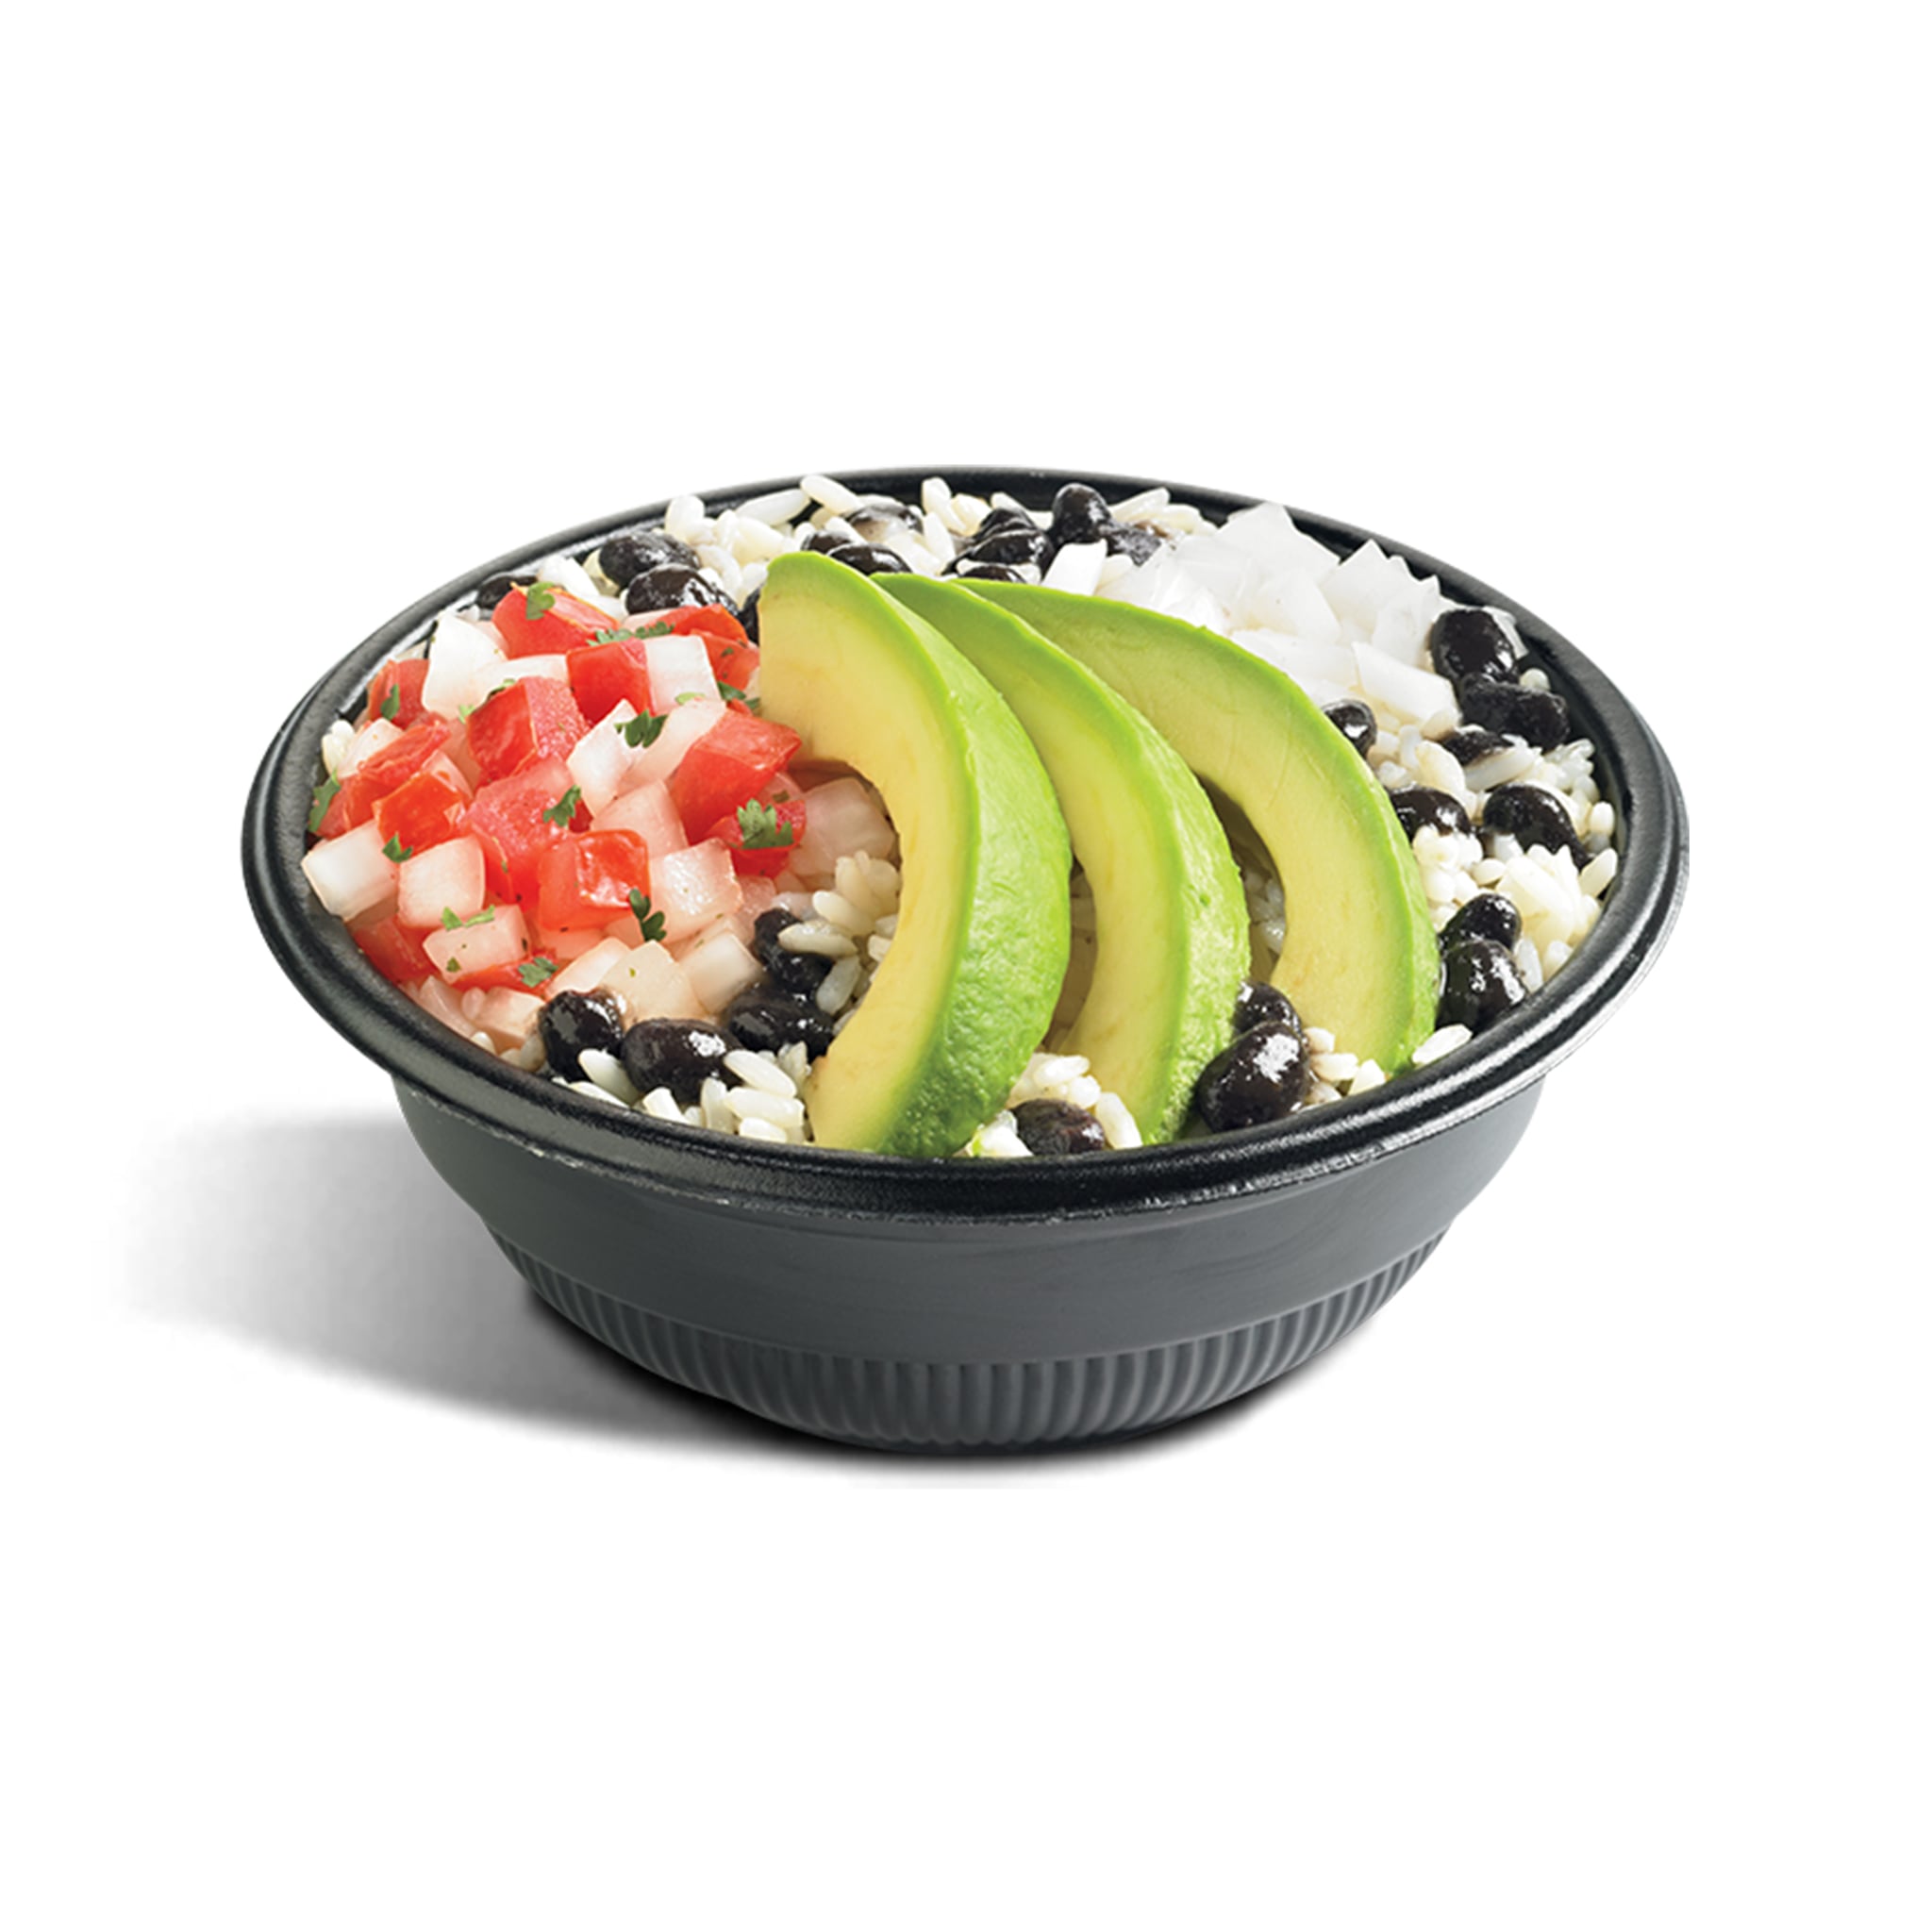 Avocado Veggie Fresca Bowl The Healthiest Things You Can Order